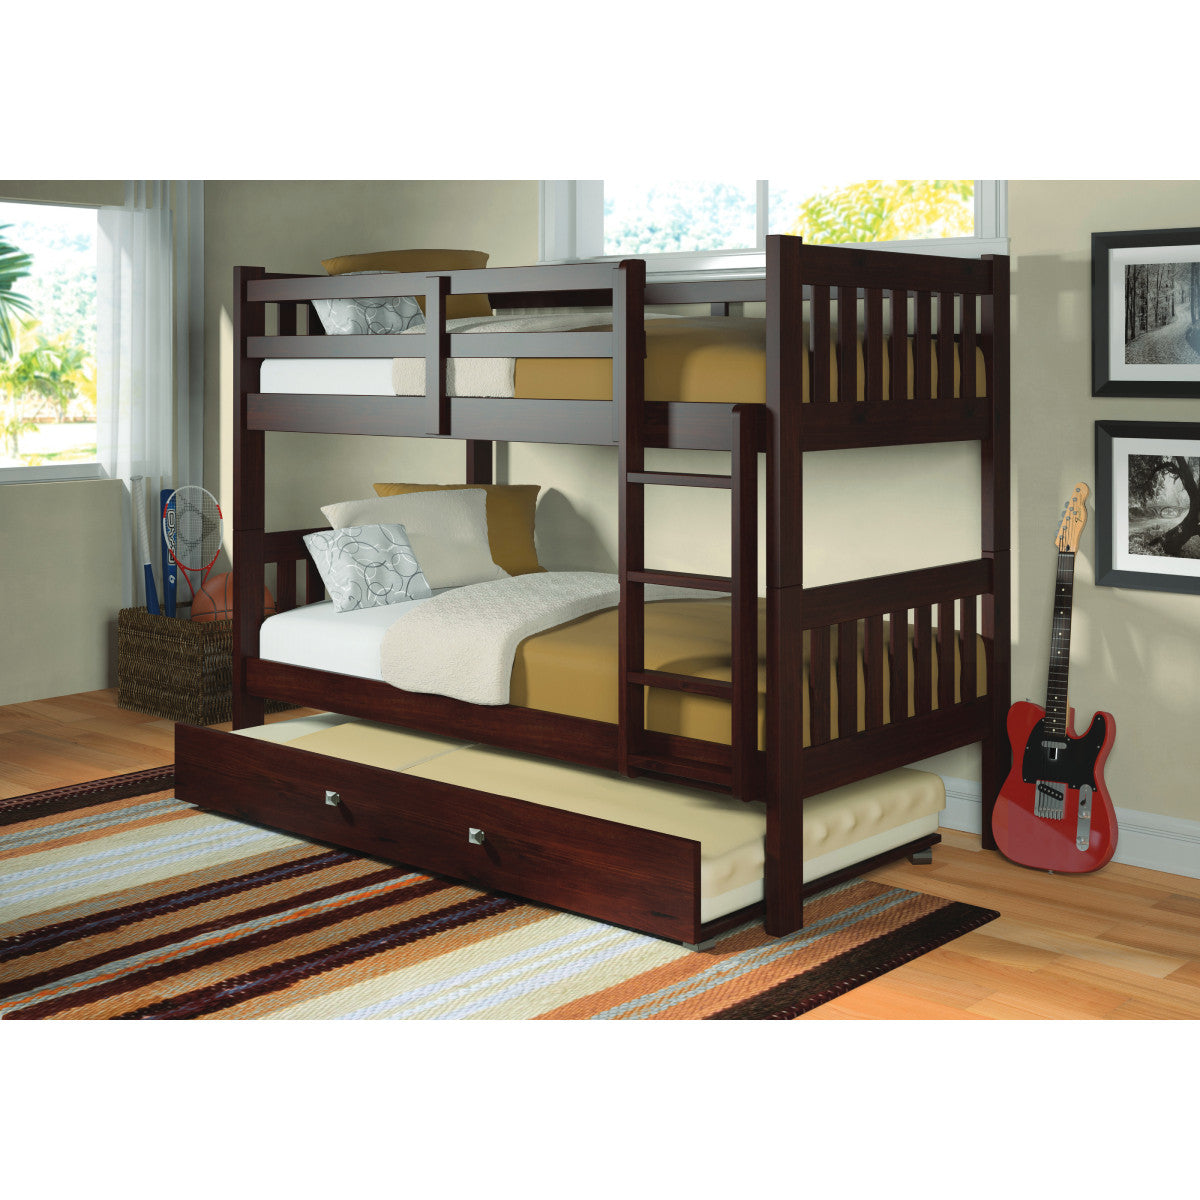 TWIN/TWIN MISSION BUNK BED W/TWIN TRUNDLE BED IN CAPPUCCINO